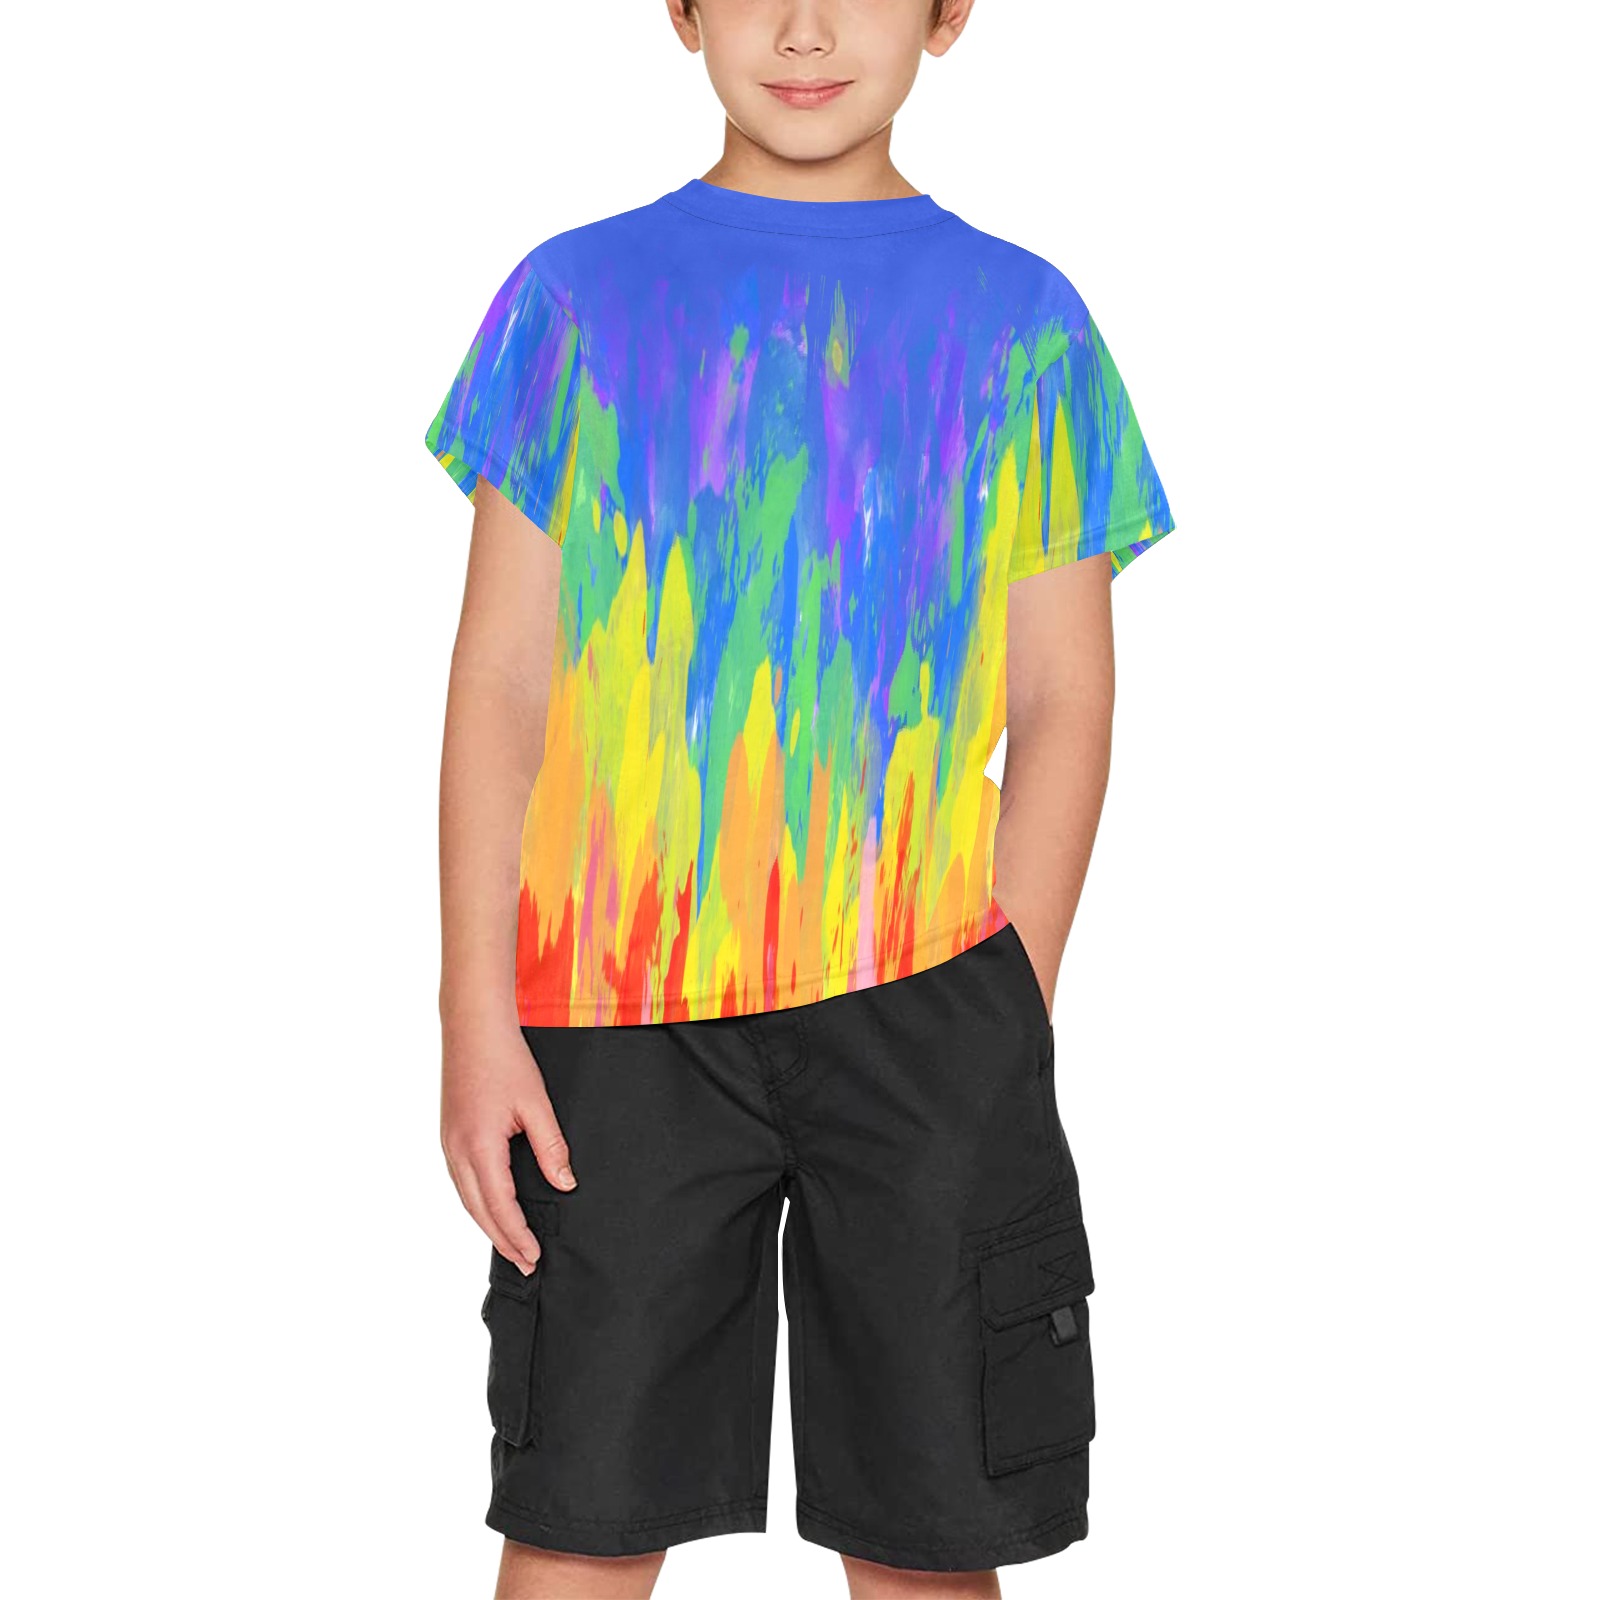 Flames Paint Abstract Classic Blue Big Boys' All Over Print Crew Neck T-Shirt (Model T40-2)